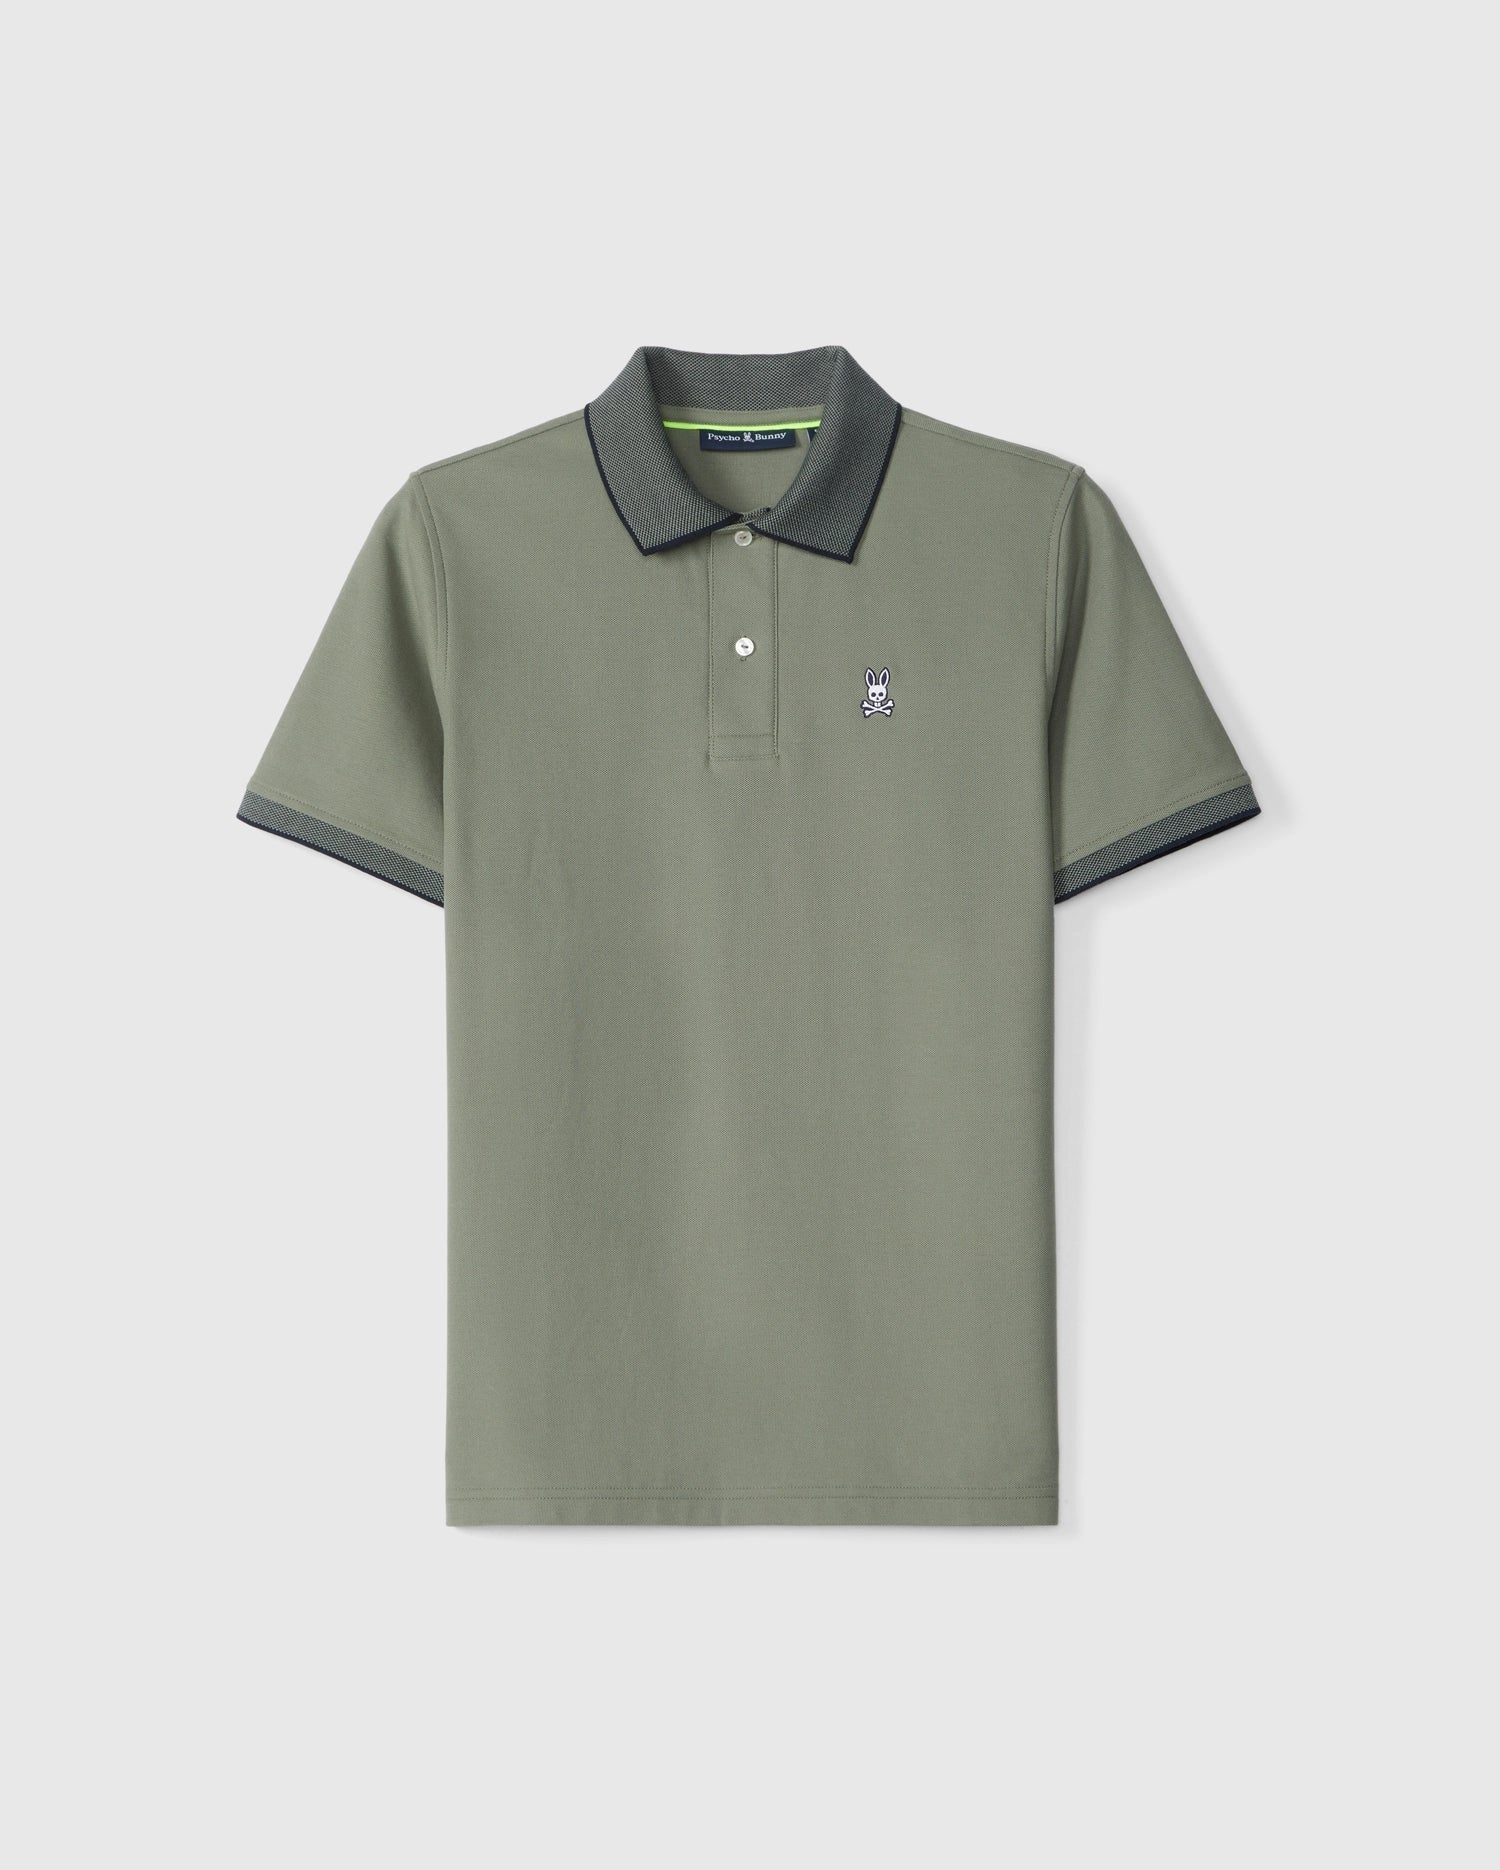 Men's New Arrivals : Polos, Tees, Shorts & more